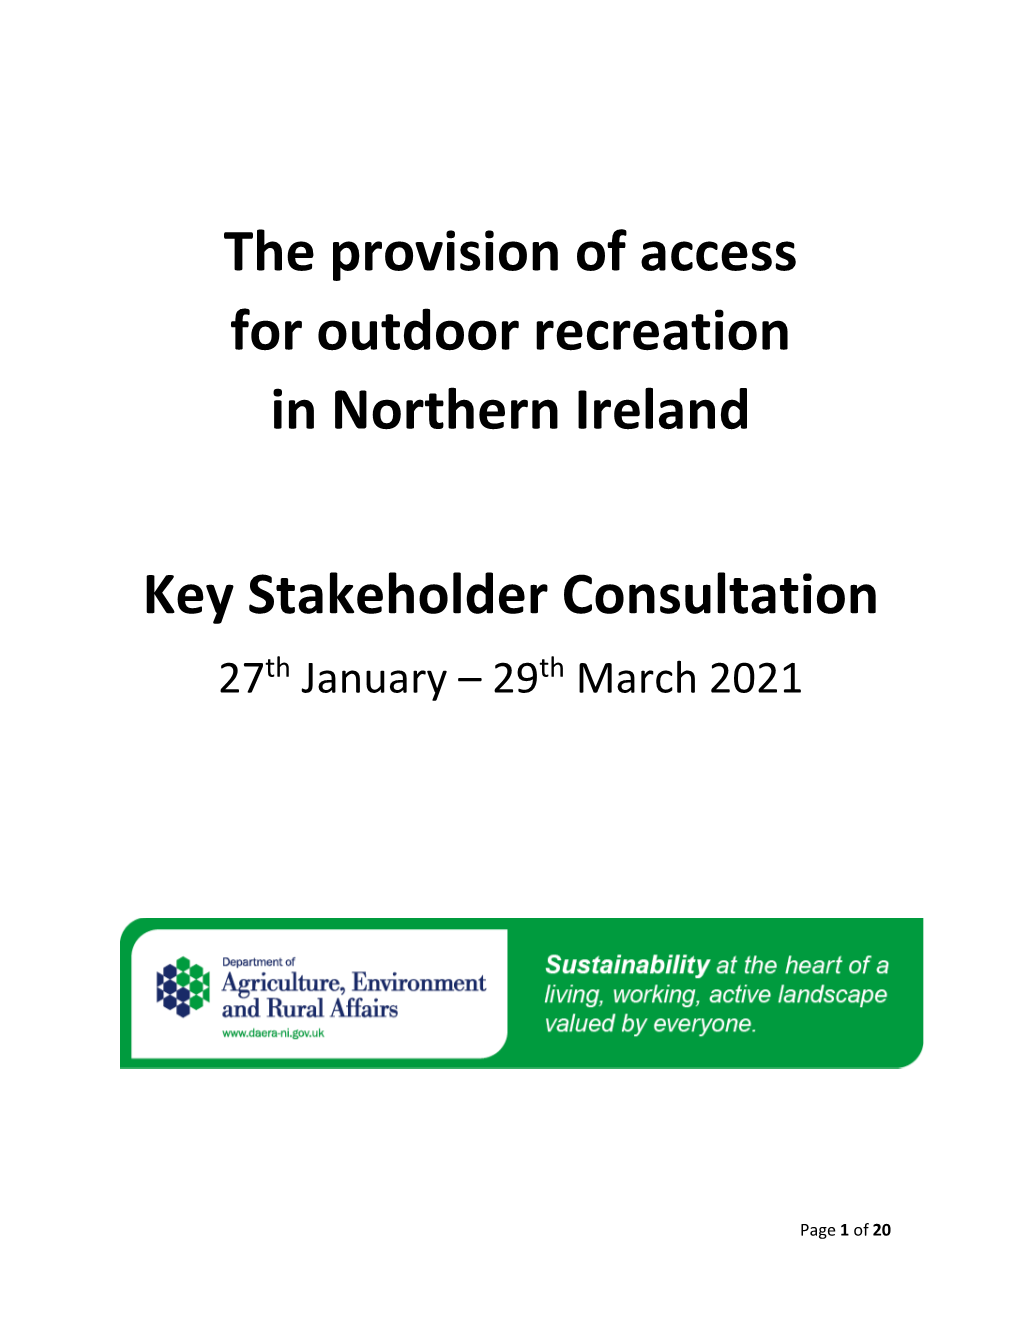 The Provision of Access for Outdoor Recreation in Northern Ireland